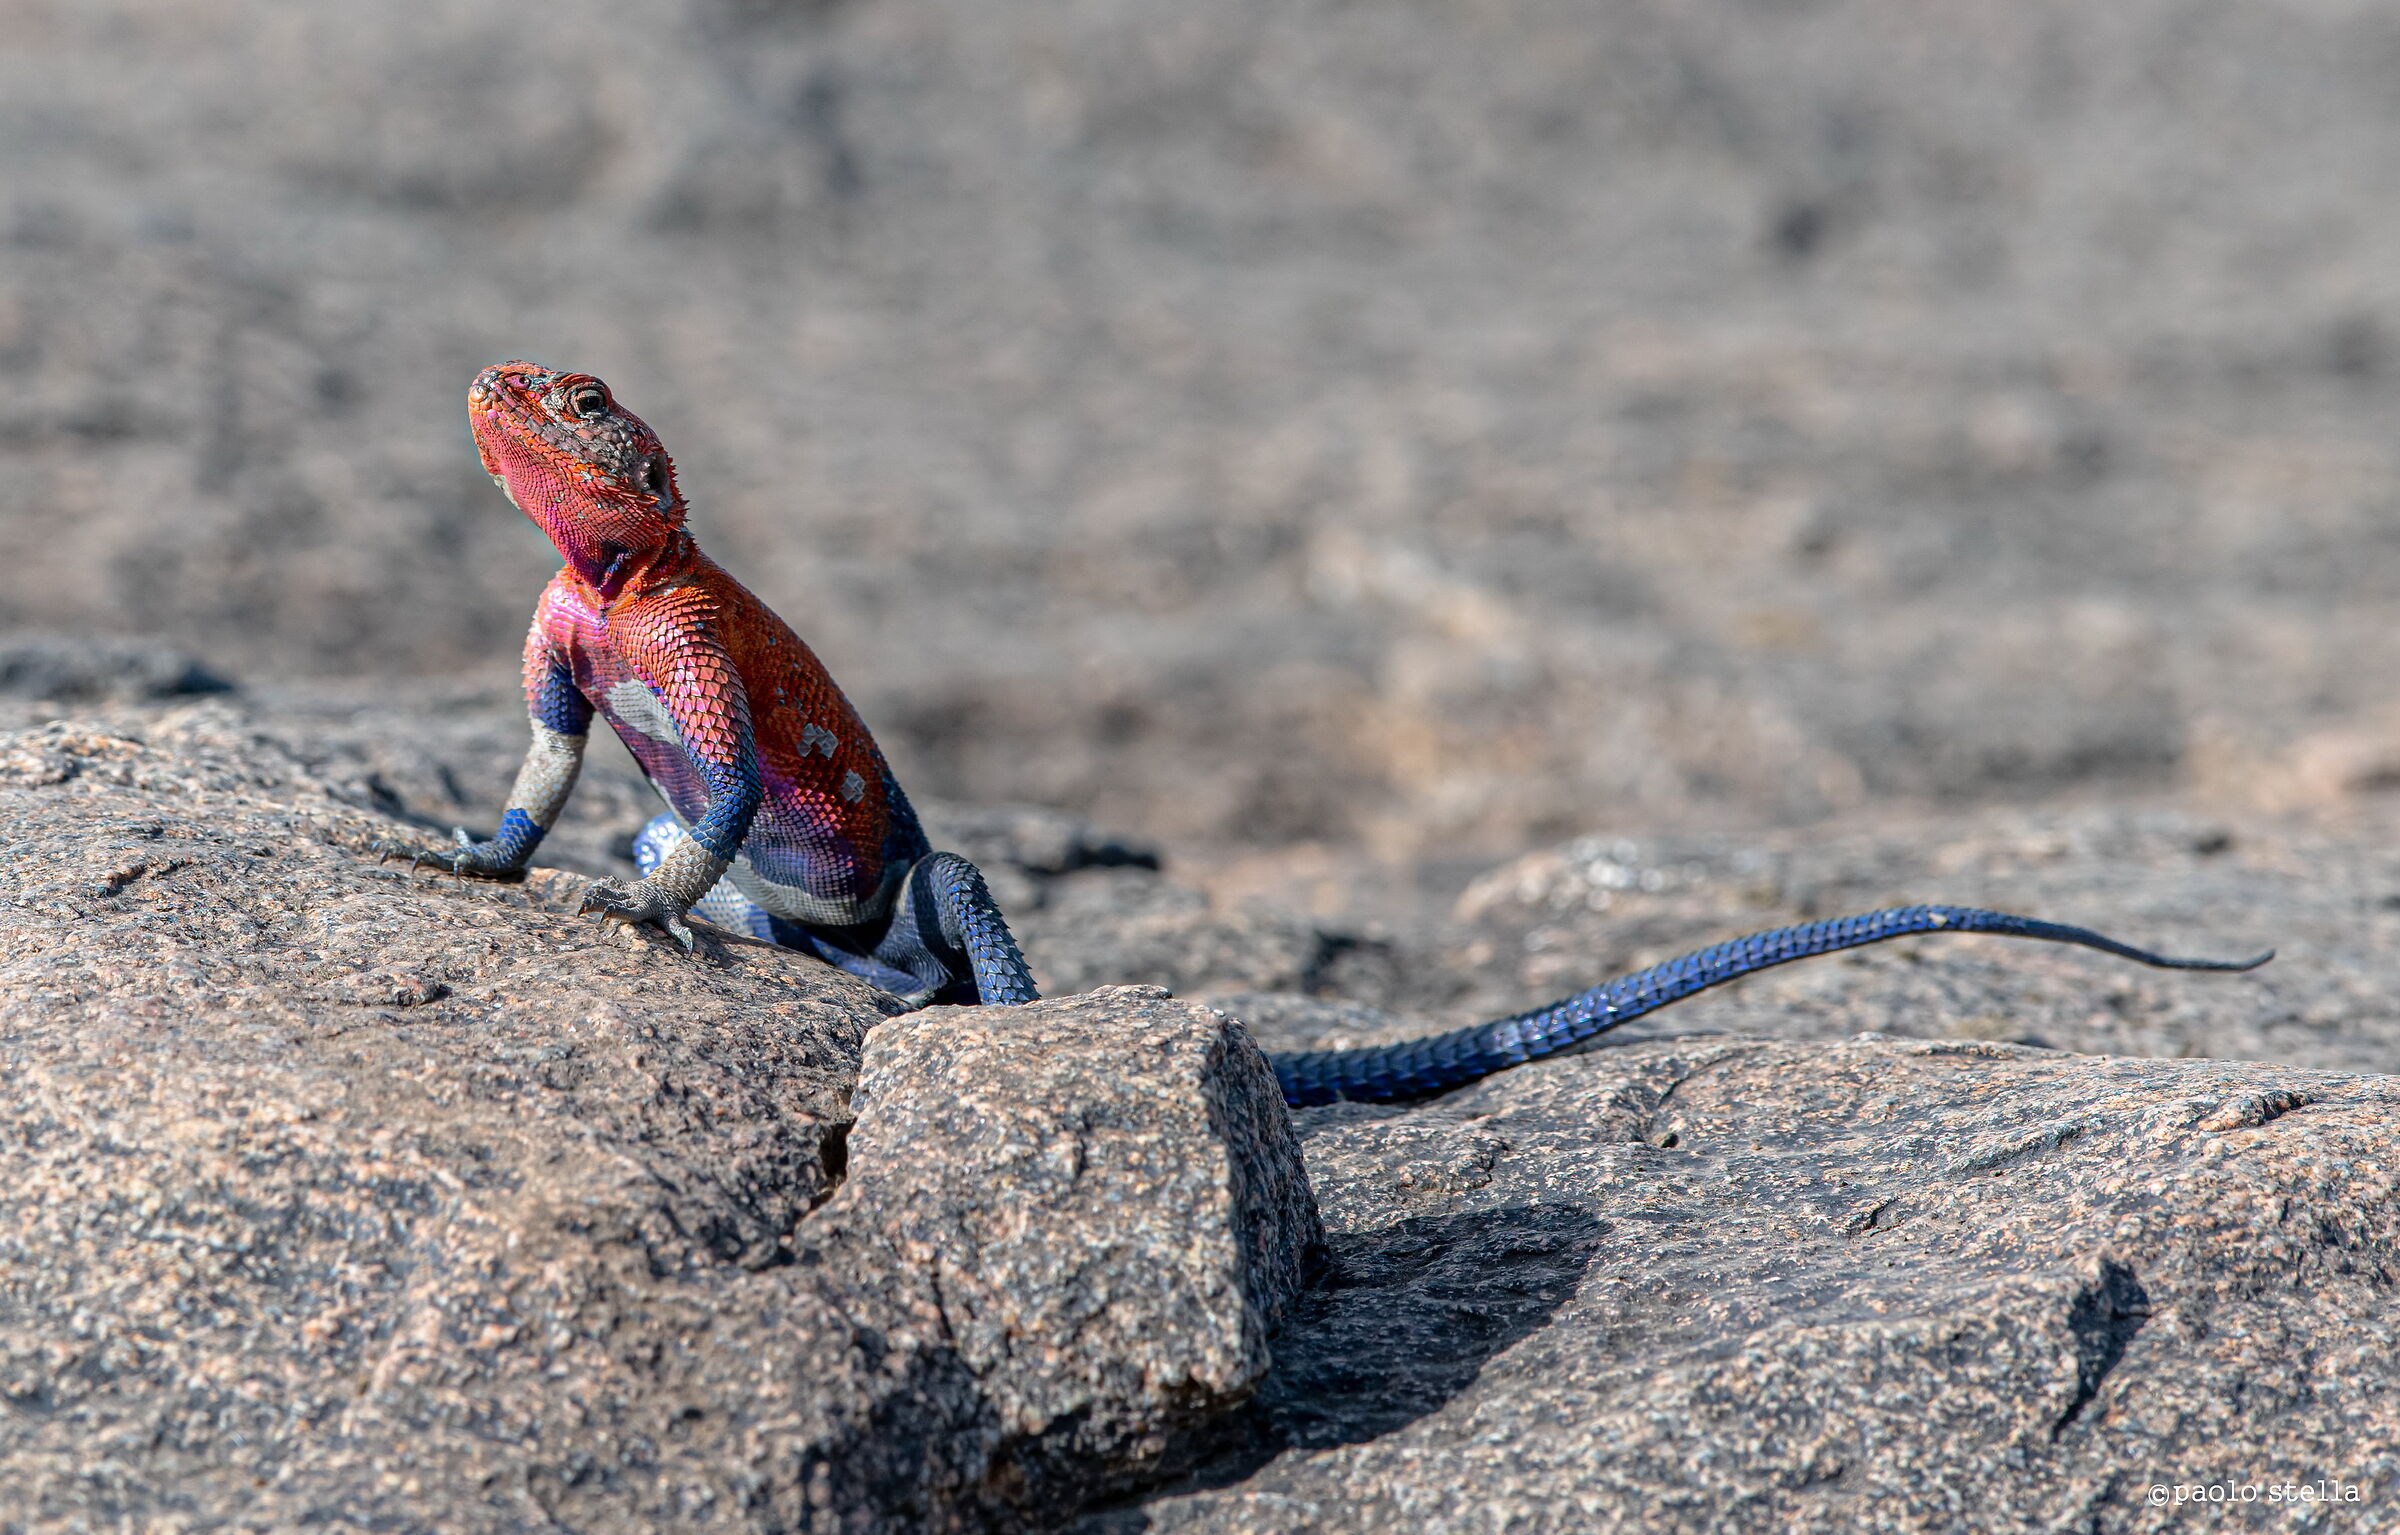 The livery of the Rock Agama...